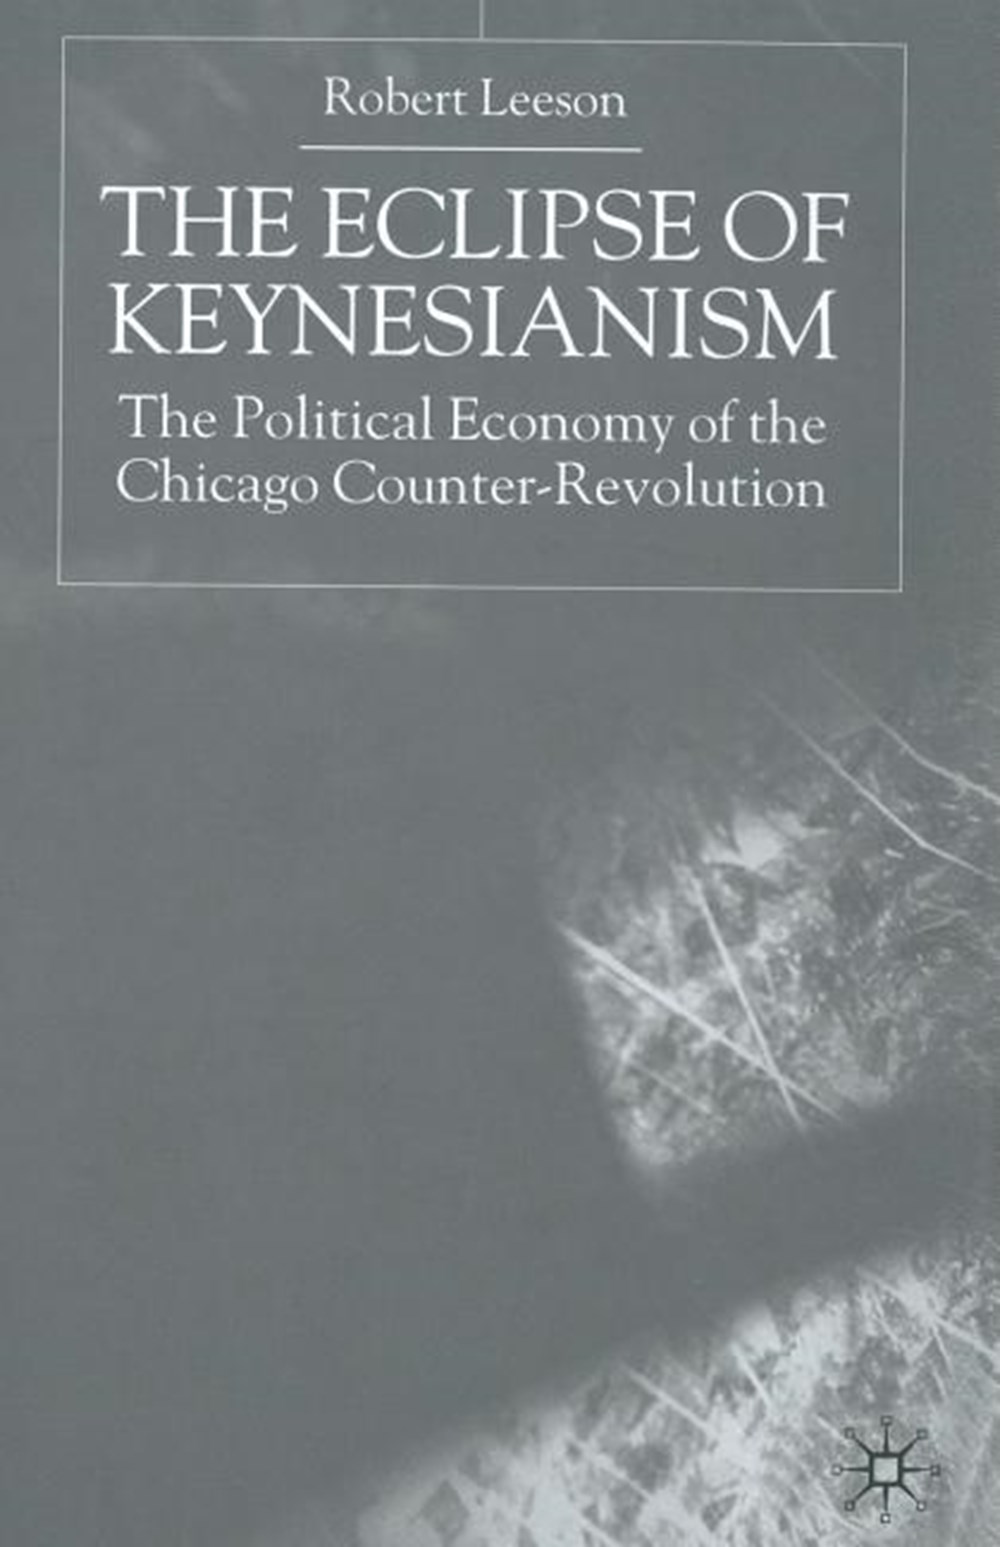 Eclipse of Keynesianism: The Political Economy of the Chicago Counter-Revolution (2000)